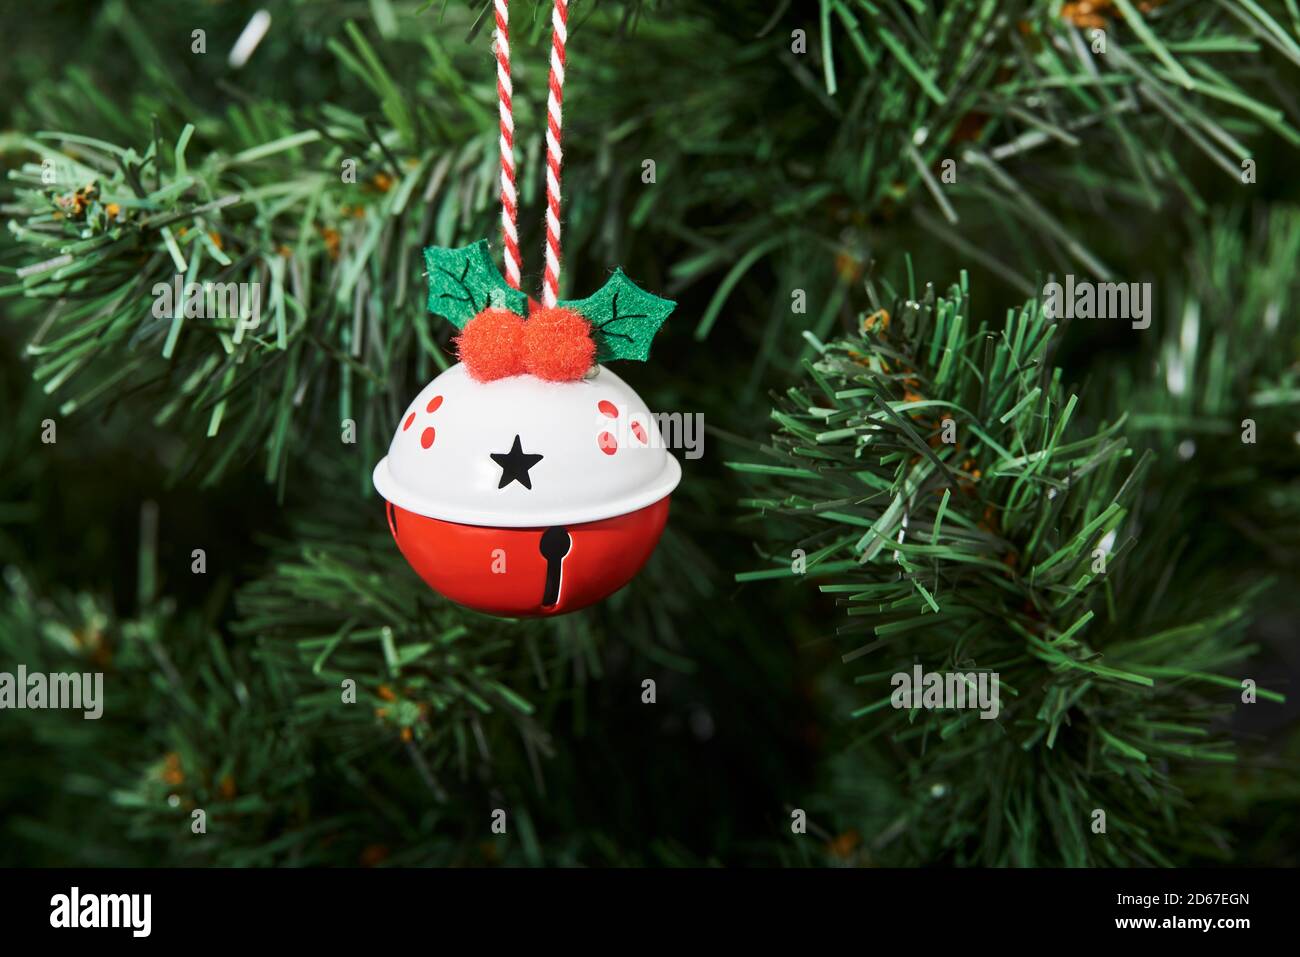 Red and white beautiful decorated bauble hanging from a Christmas tree, copy space Stock Photo